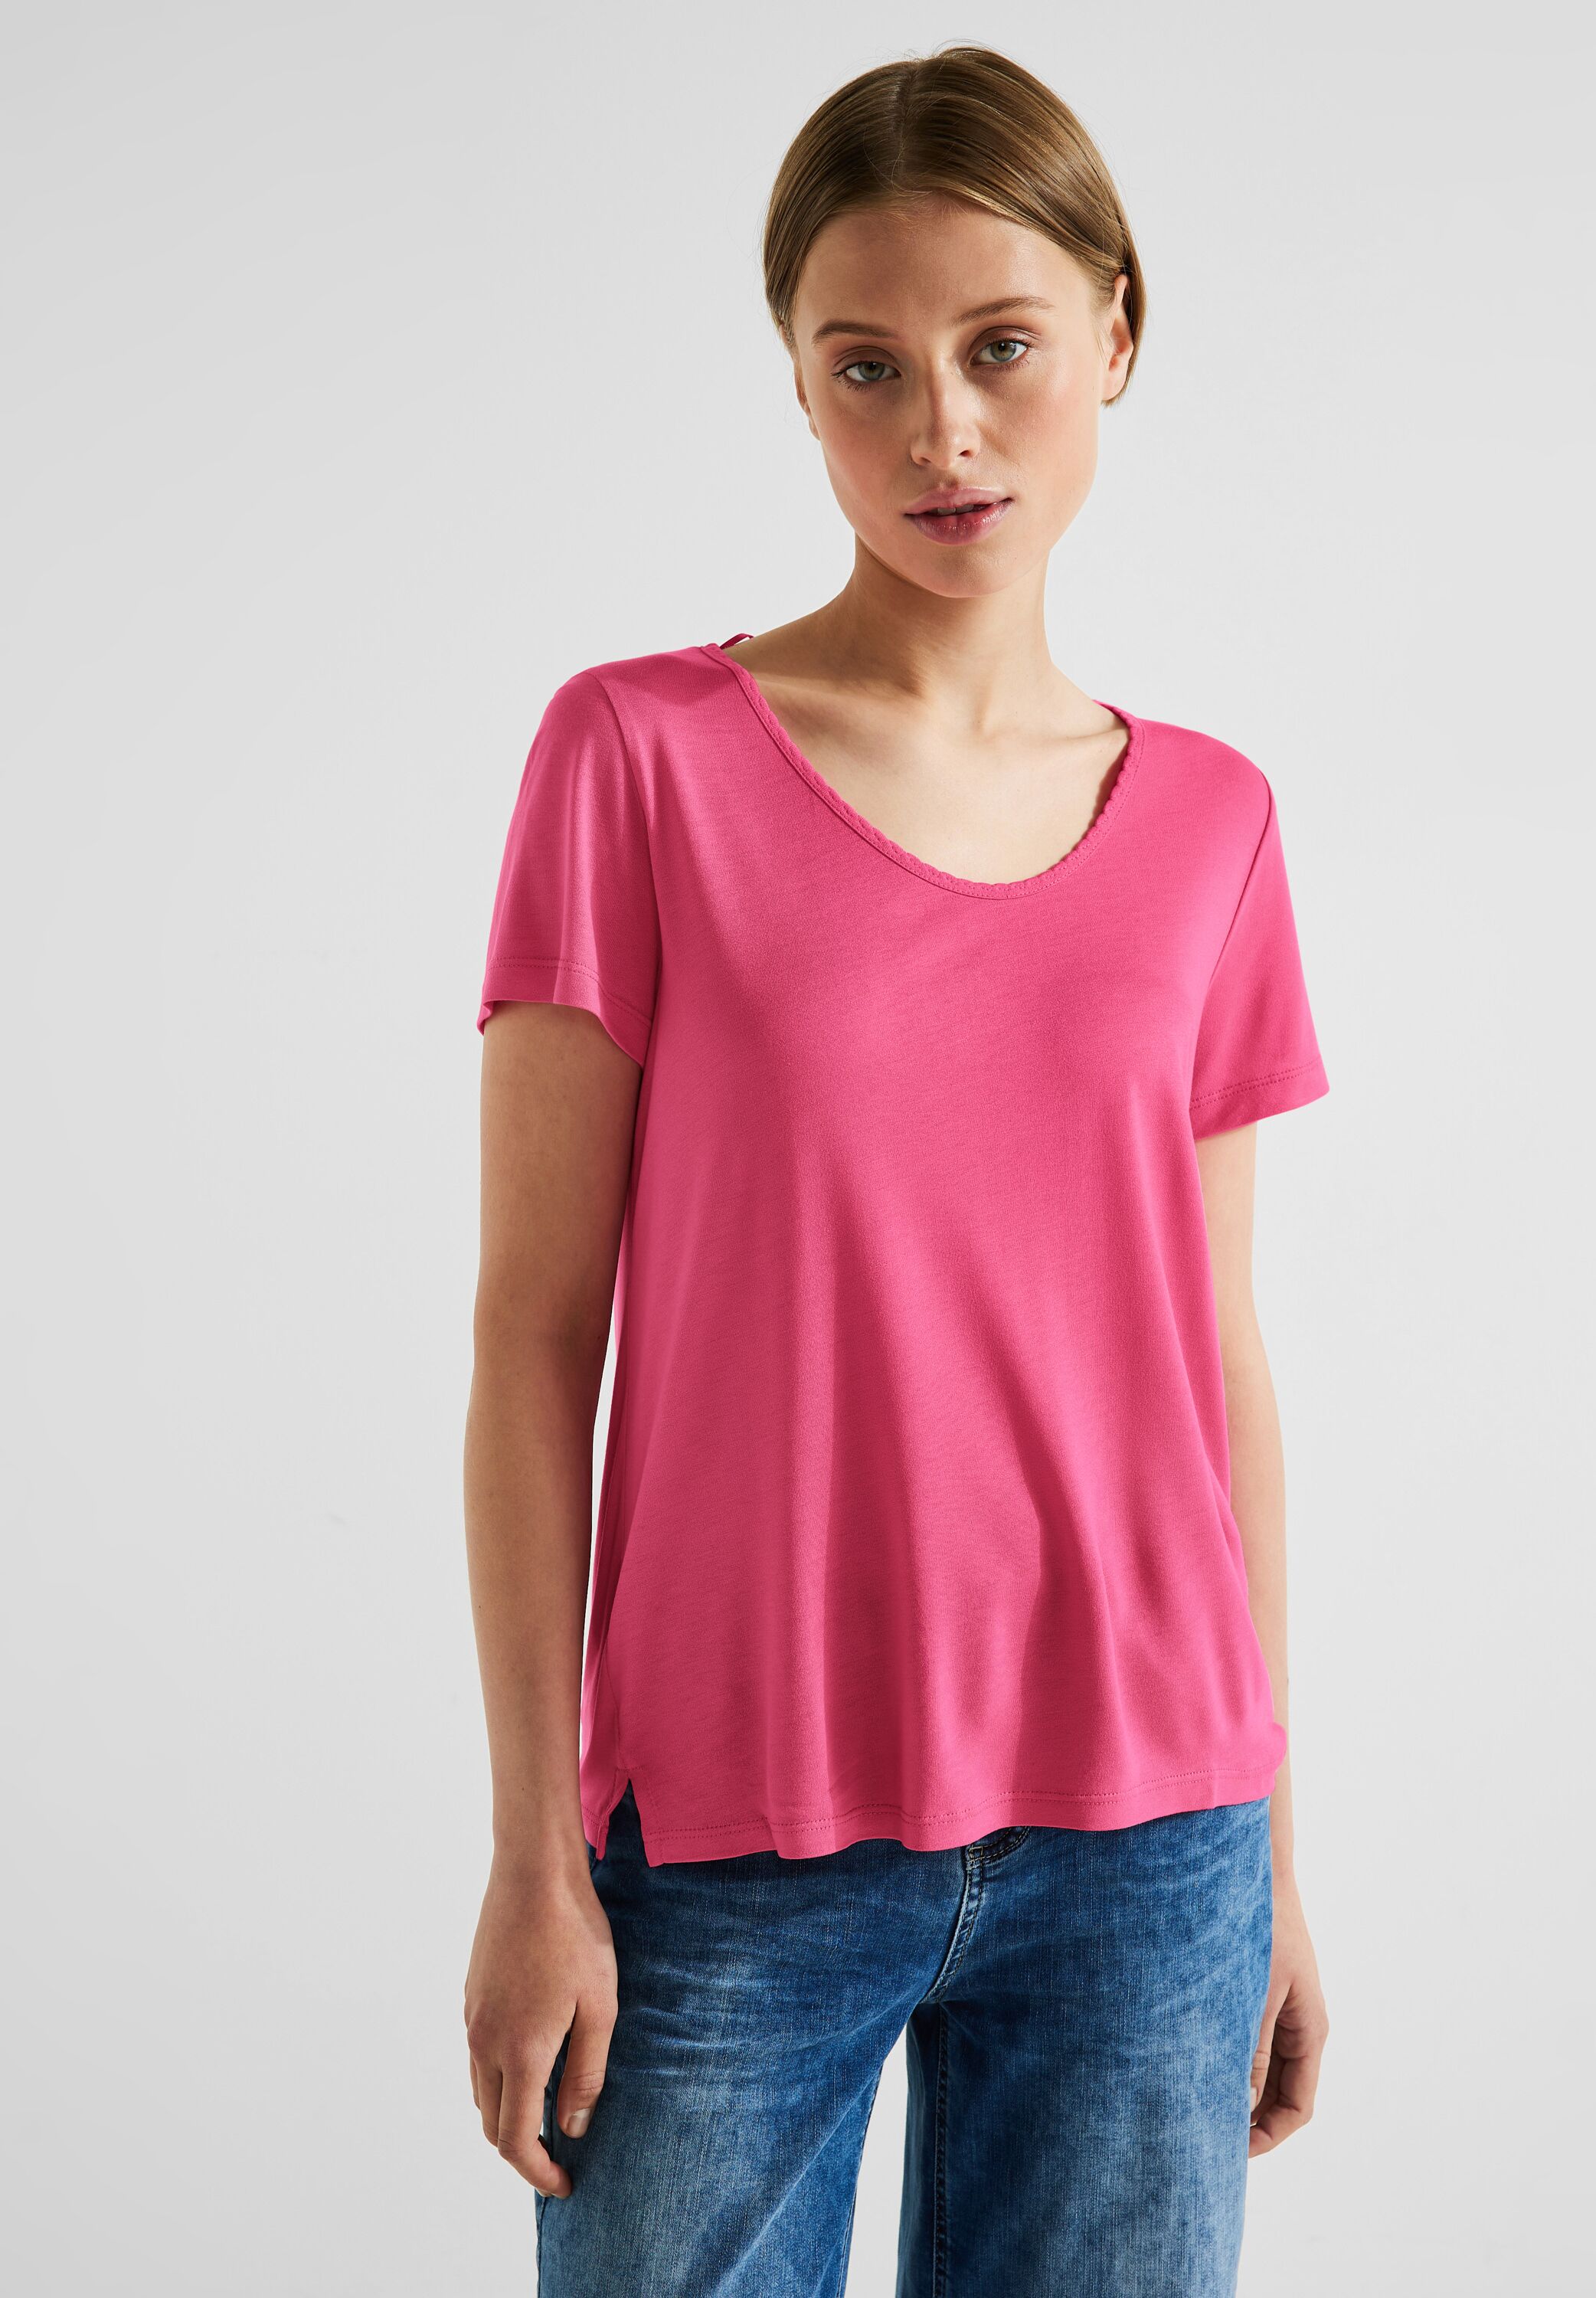 reduziert in Street A320124-14647 - T-Shirt CONCEPT Rose One im Berry SALE Mode